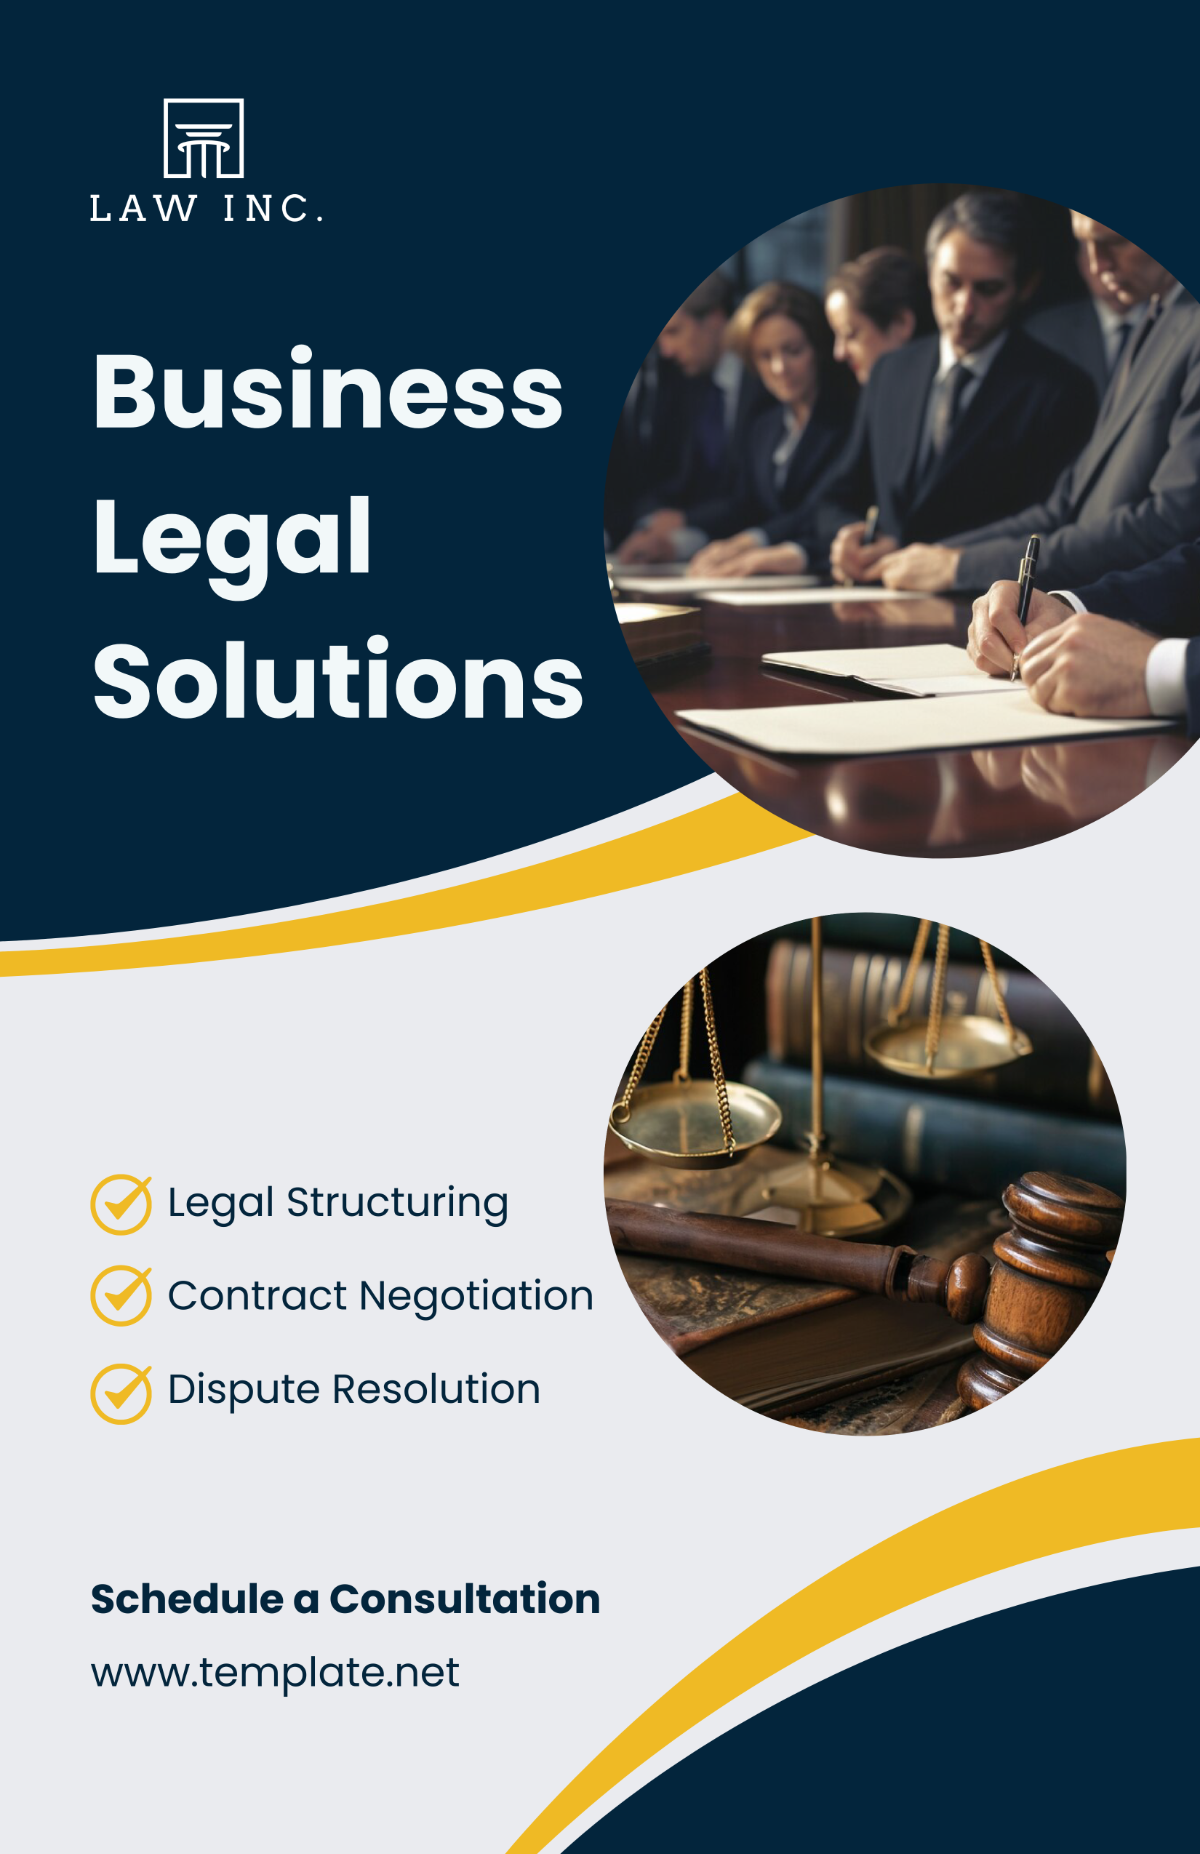 Law Firm Service Poster Template